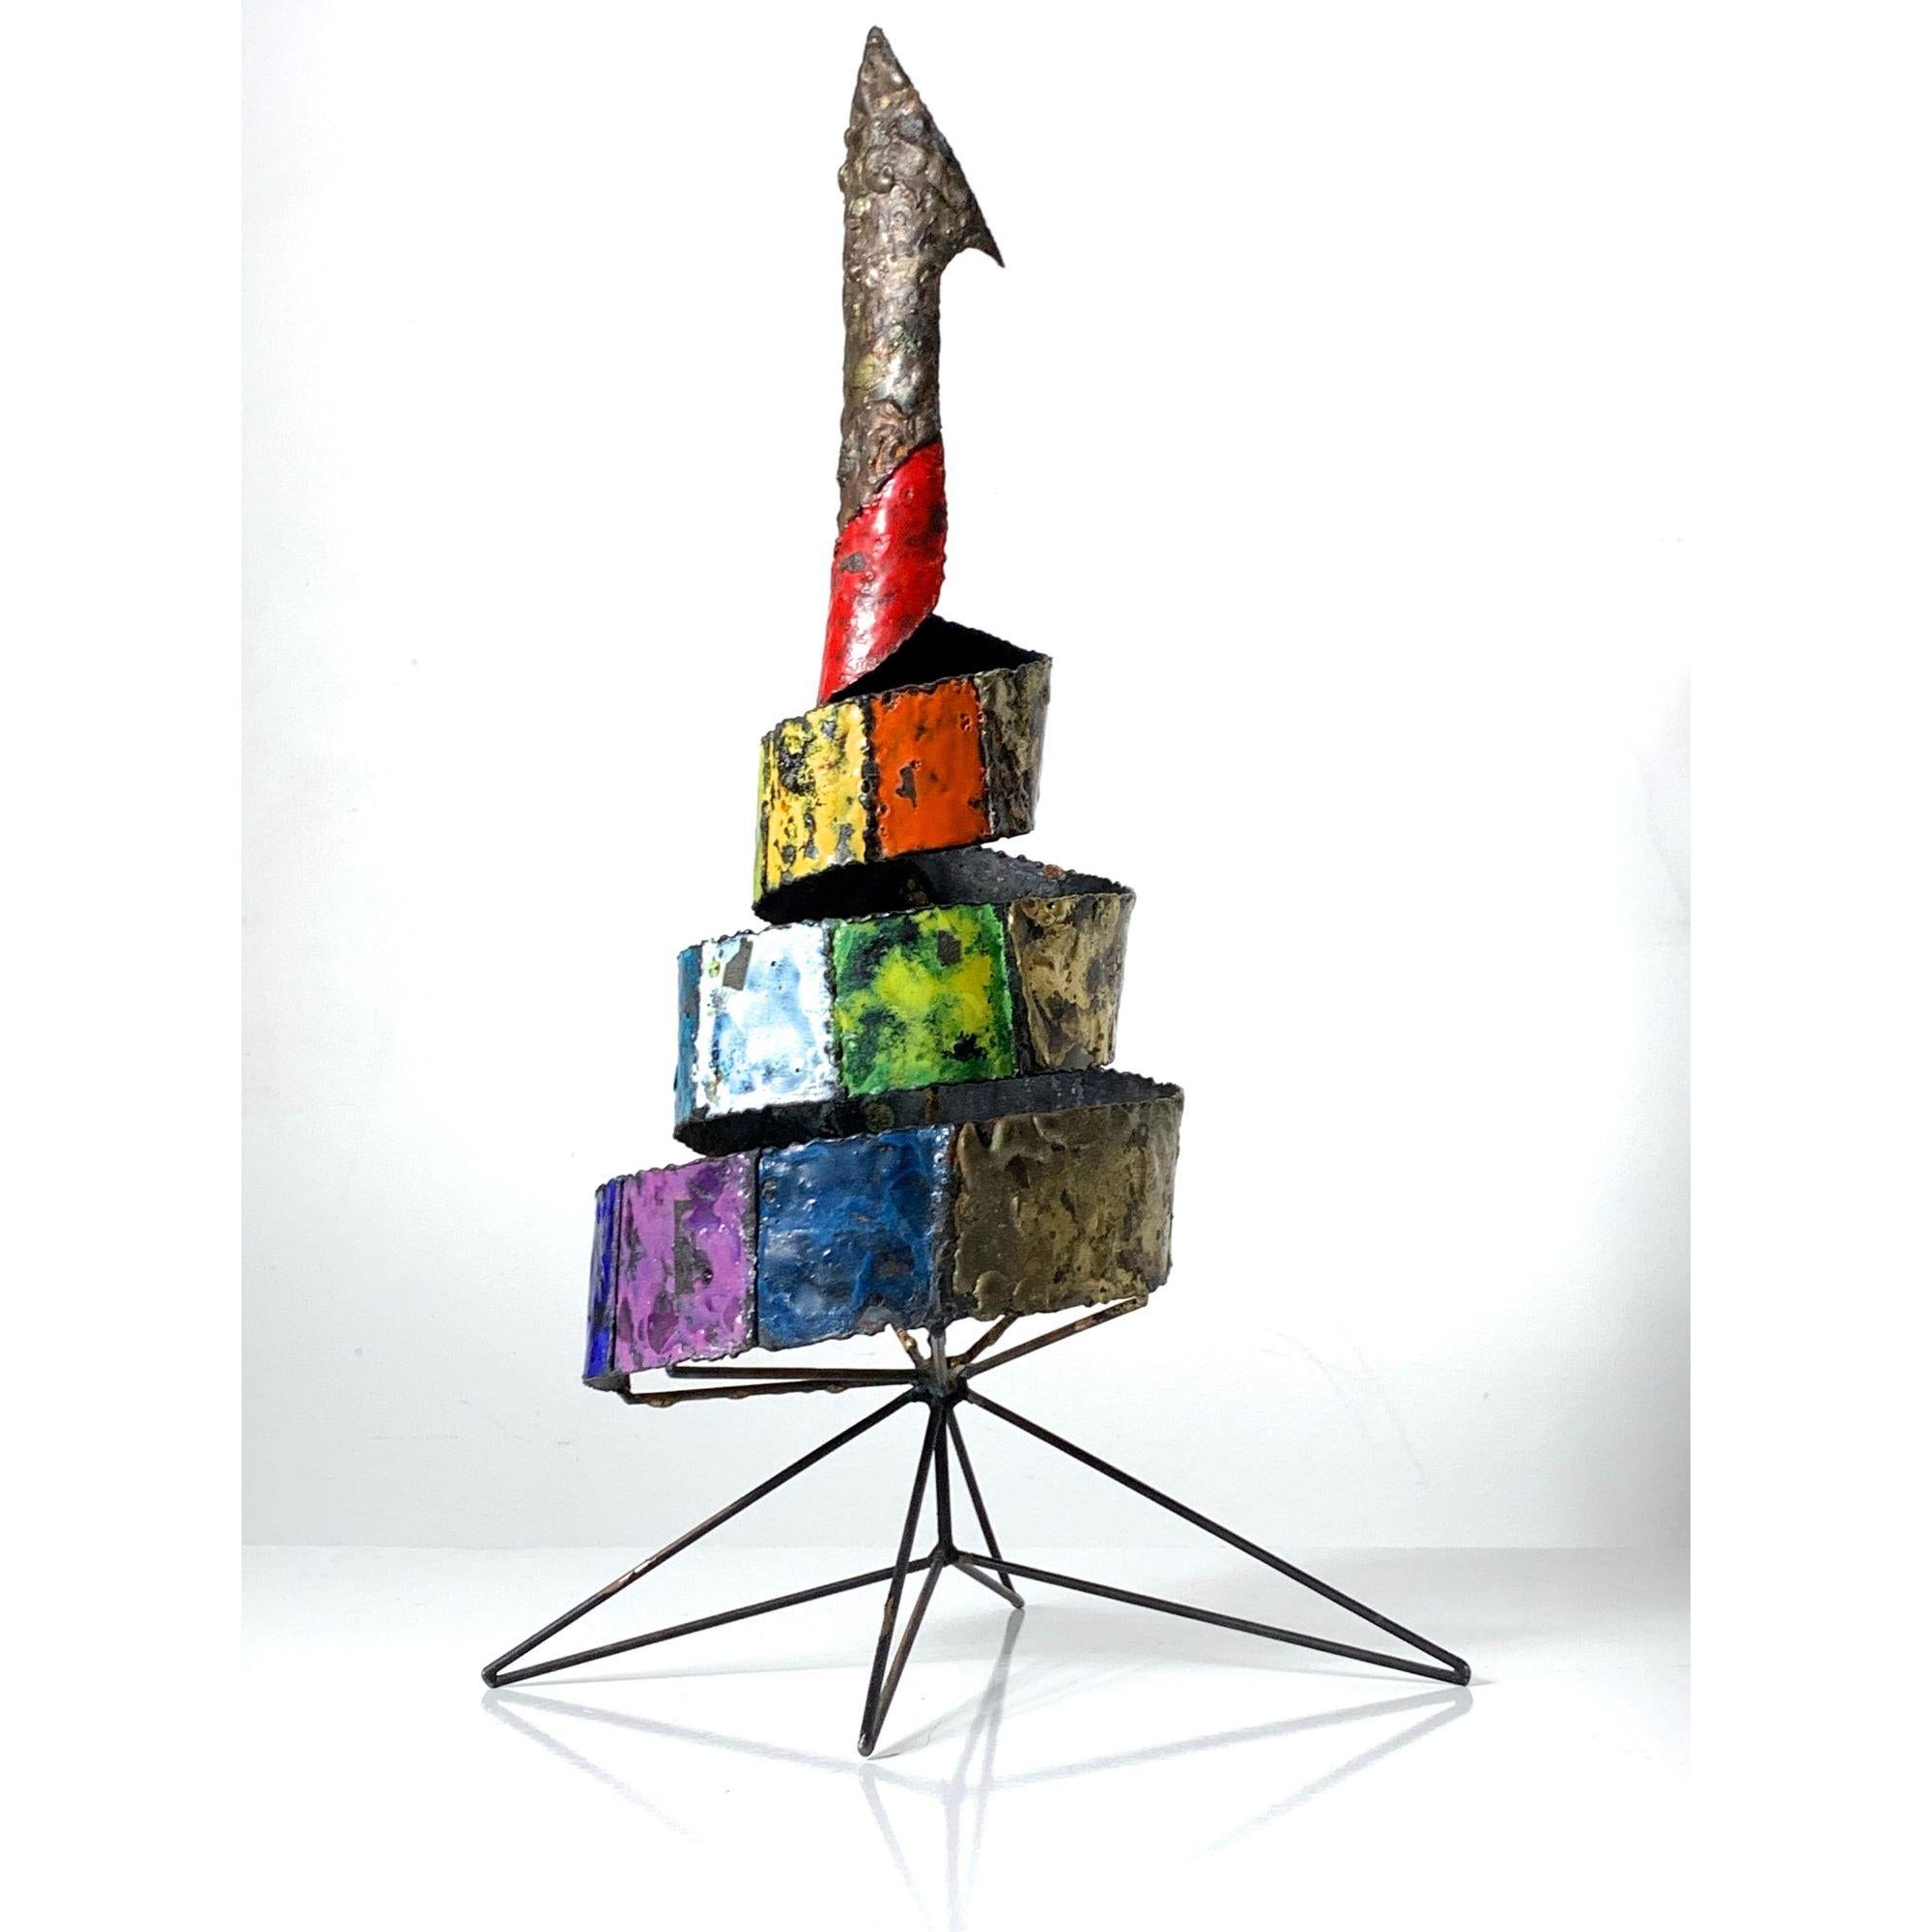 Vintage Abstract Enamel Metal Sculpture 1960s

Unique abstract metal sculpture circa 1960s. 
Spiral ribbon form with colorful blocks of applied enamel and melt coat brass on iron hairpin base.
Unsigned.

Additional Information:
Materials: Brass and